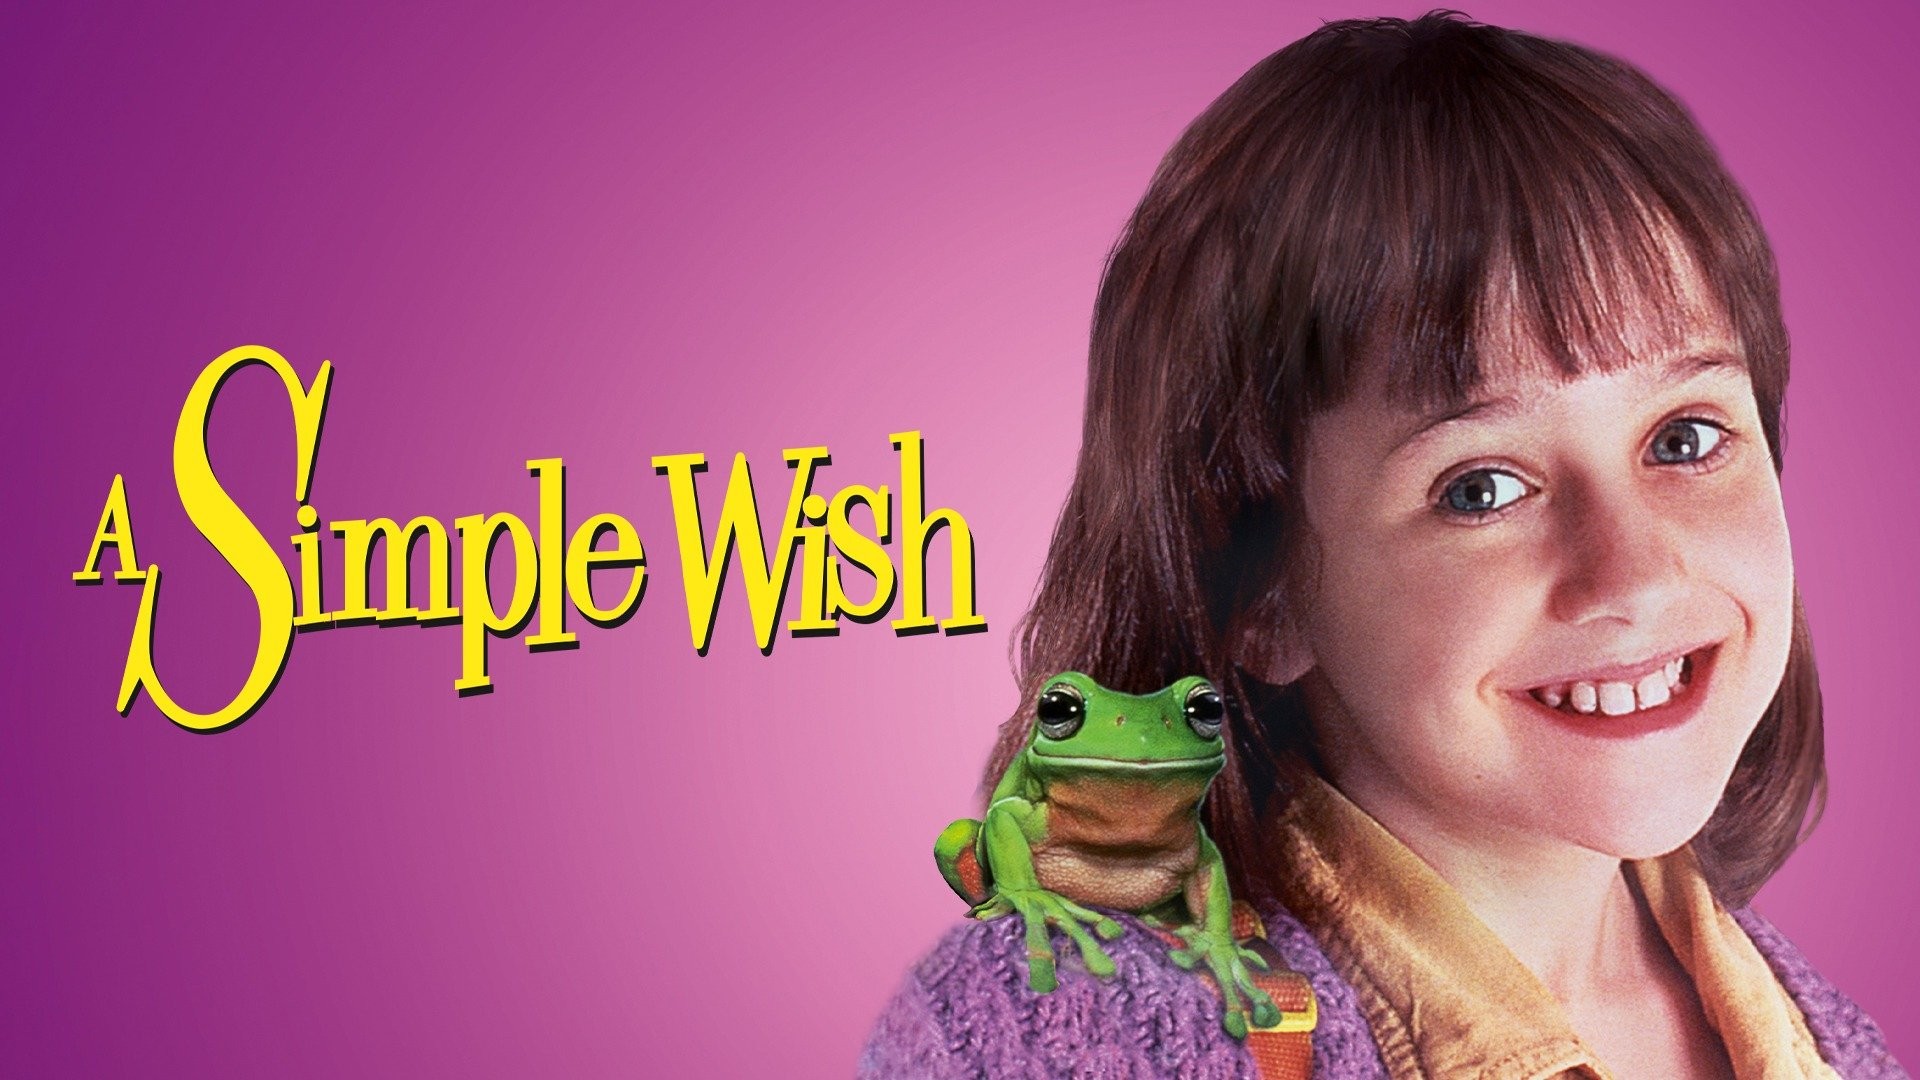 How to watch and stream A Simple Wish - 1997 on Roku